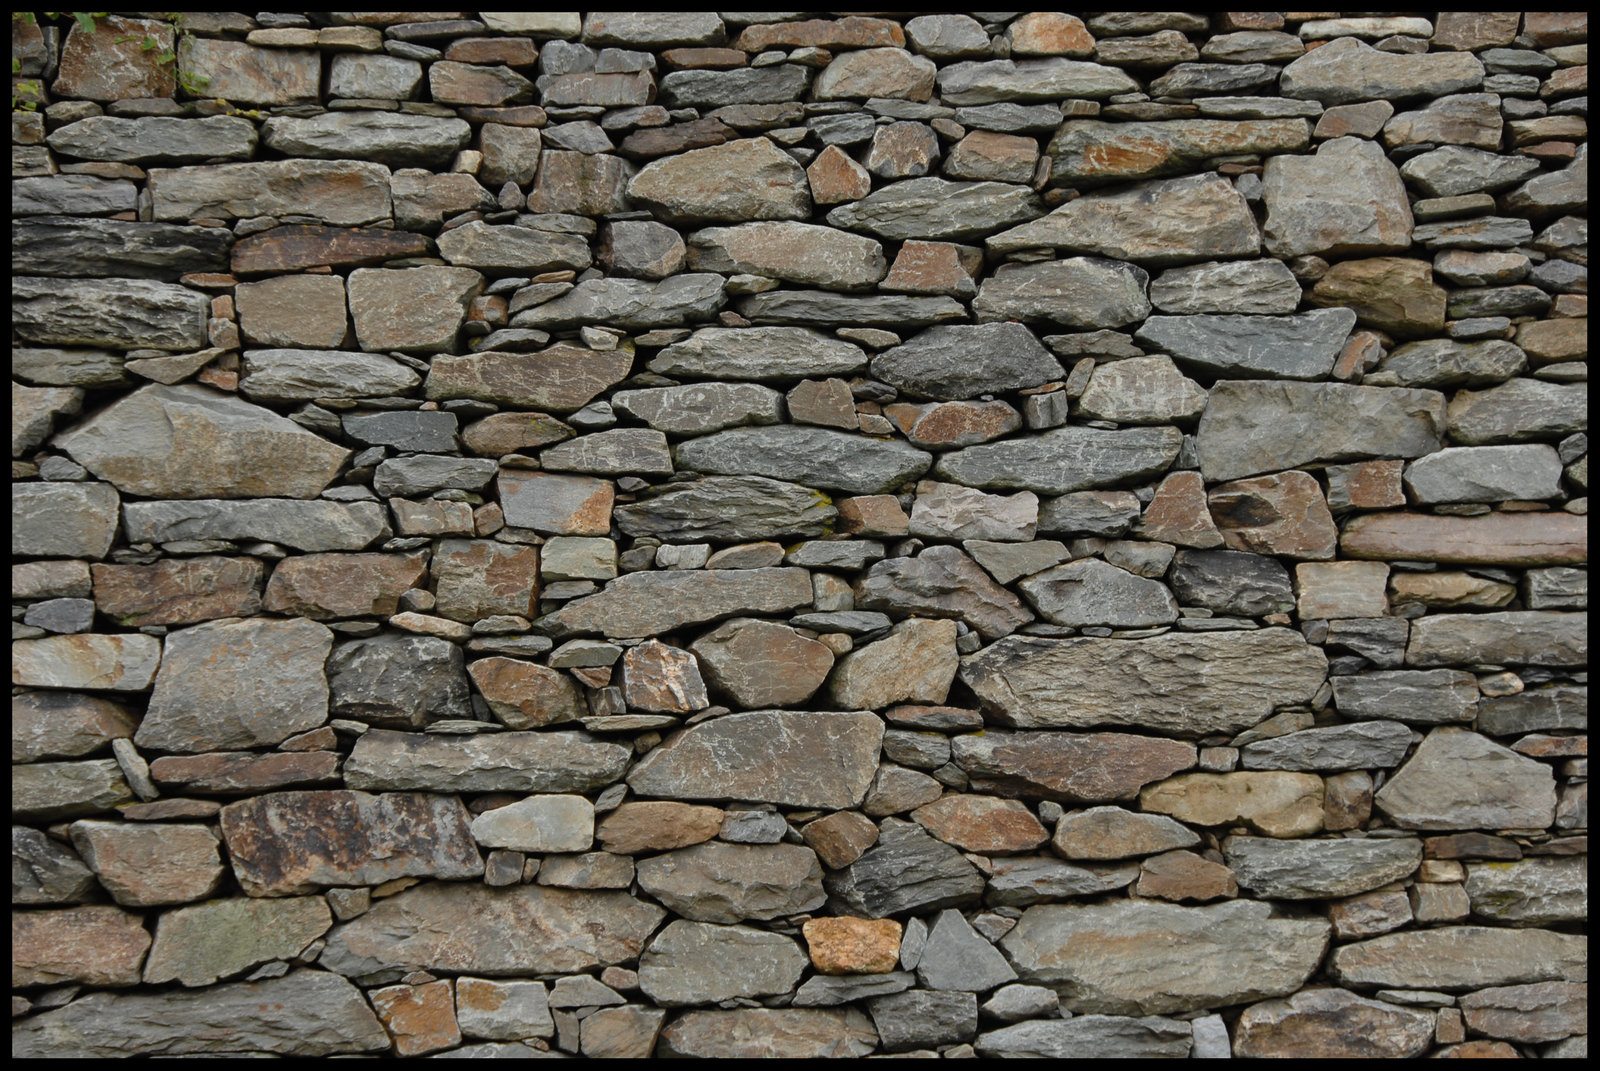 Old stone wall 2 harpers ferry by chriswellner